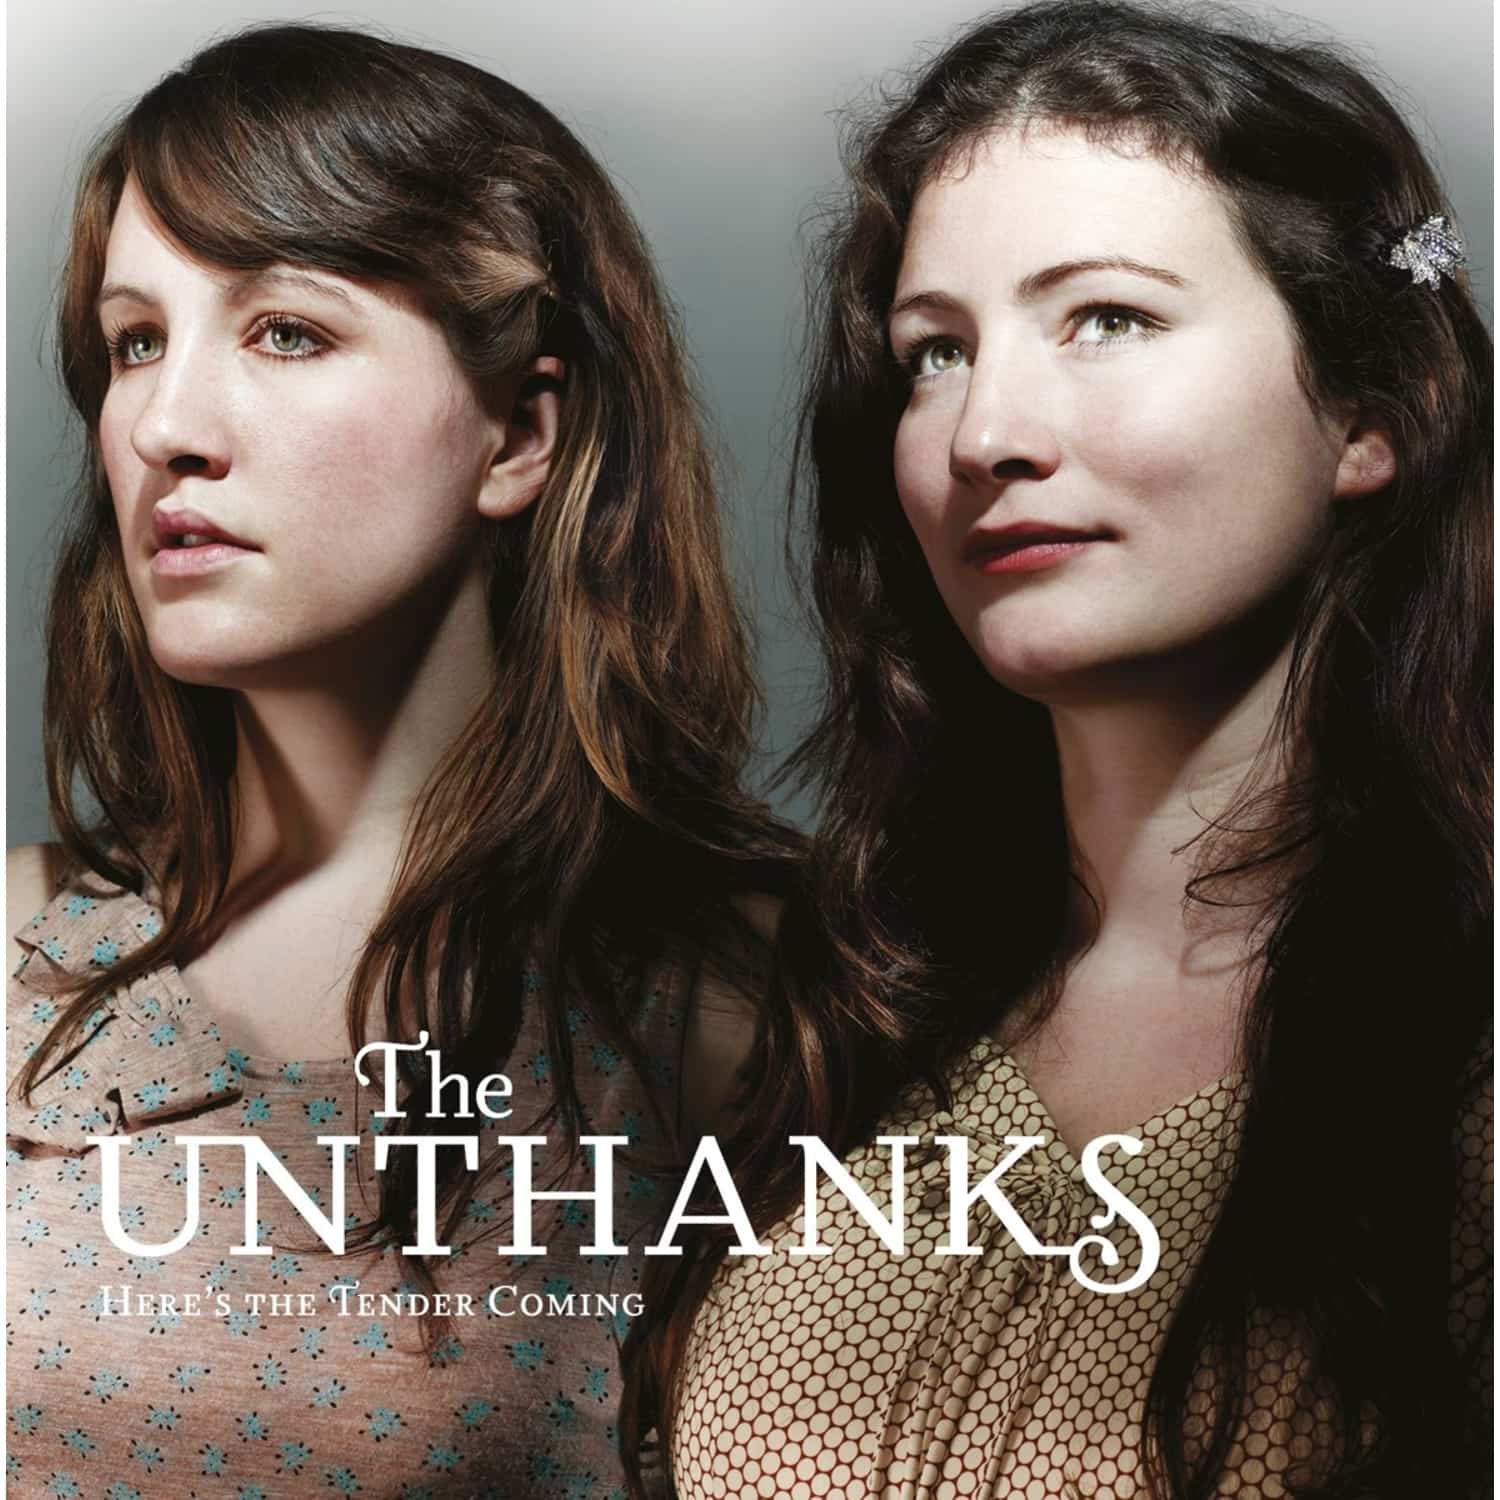 The Unthanks - HERES THE TENDER COMING 